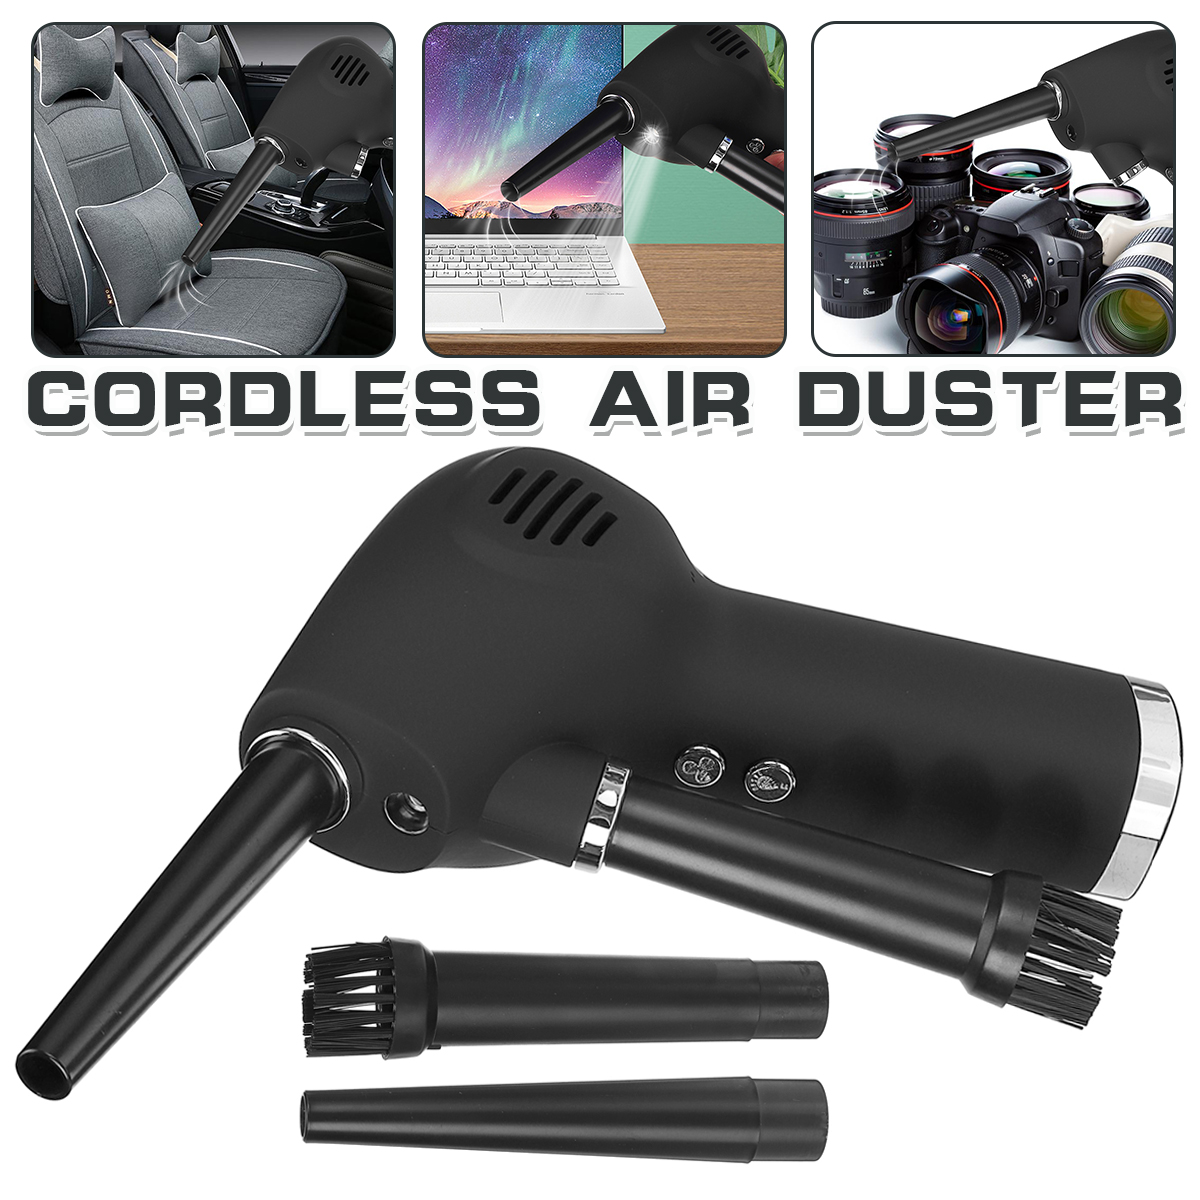 70ms-Cordless-Air-Duster-For-Computer-Cleaning-Replaces-Compressed-Spray-Gas-Cans-Rechargeable-Clean-1900743-3